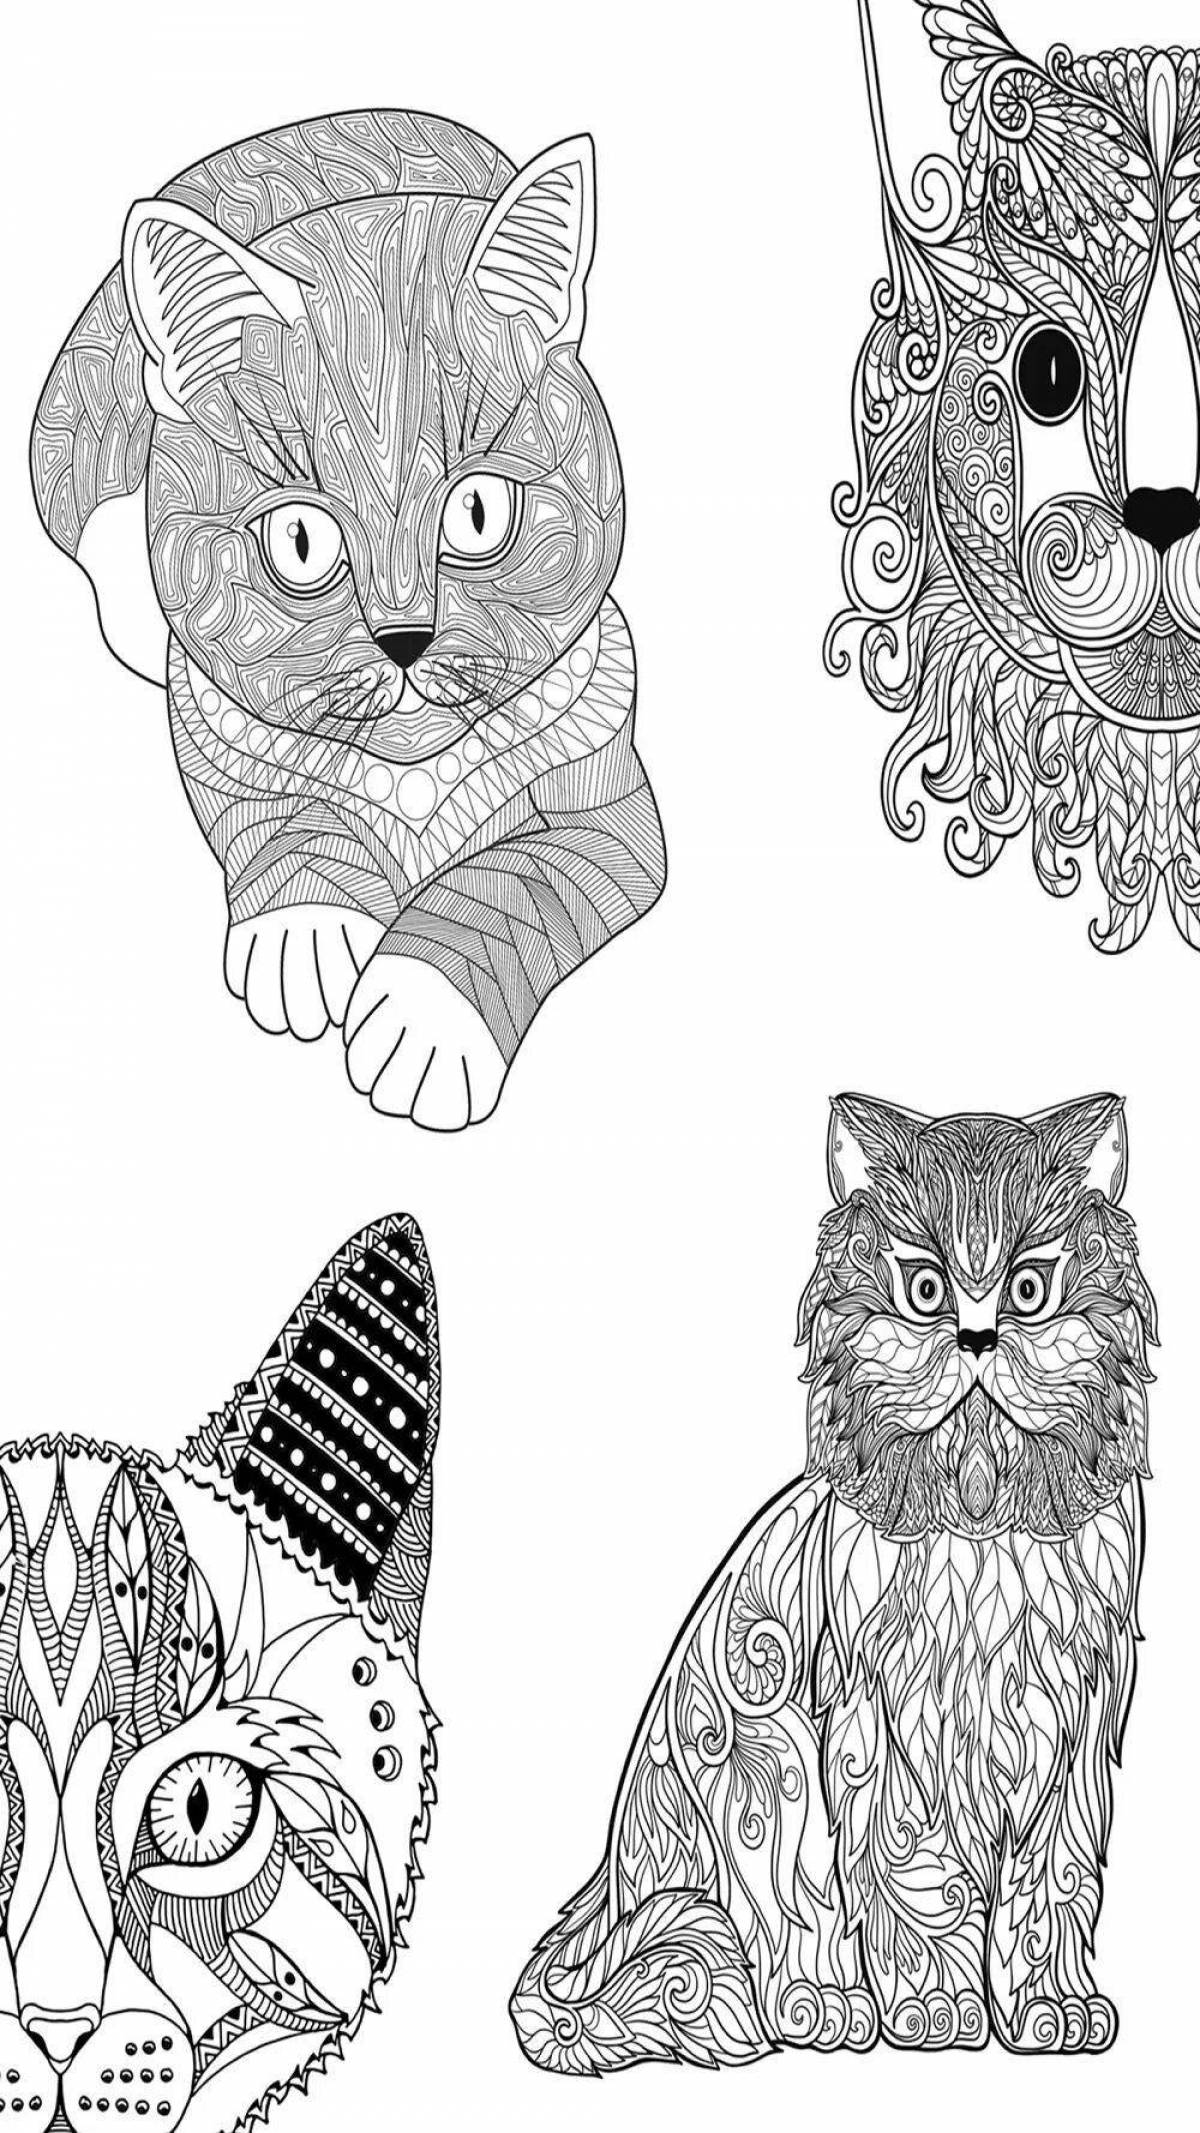 Glitter cat coloring page